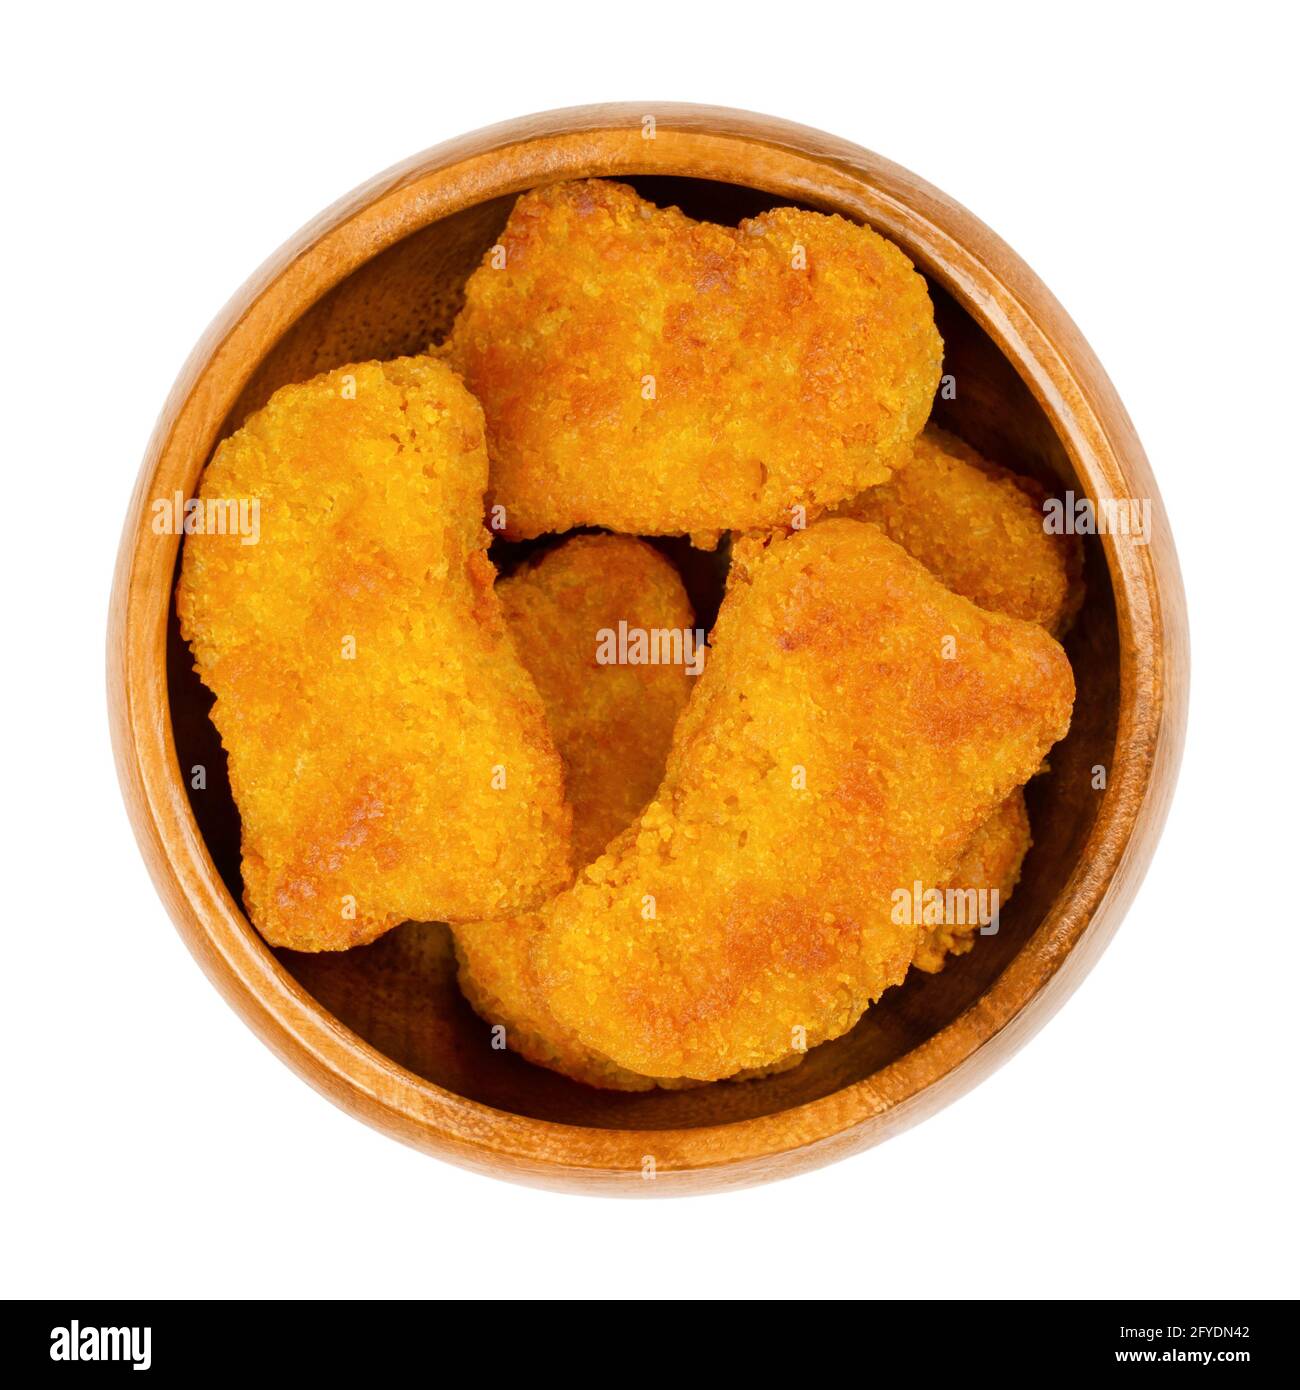 Deep-fried vegan nuggets, in a wooden bowl. Vegan nuggets, based on soy and wheat protein, in crispy breading. Fast food and snack. Close-up. Stock Photo